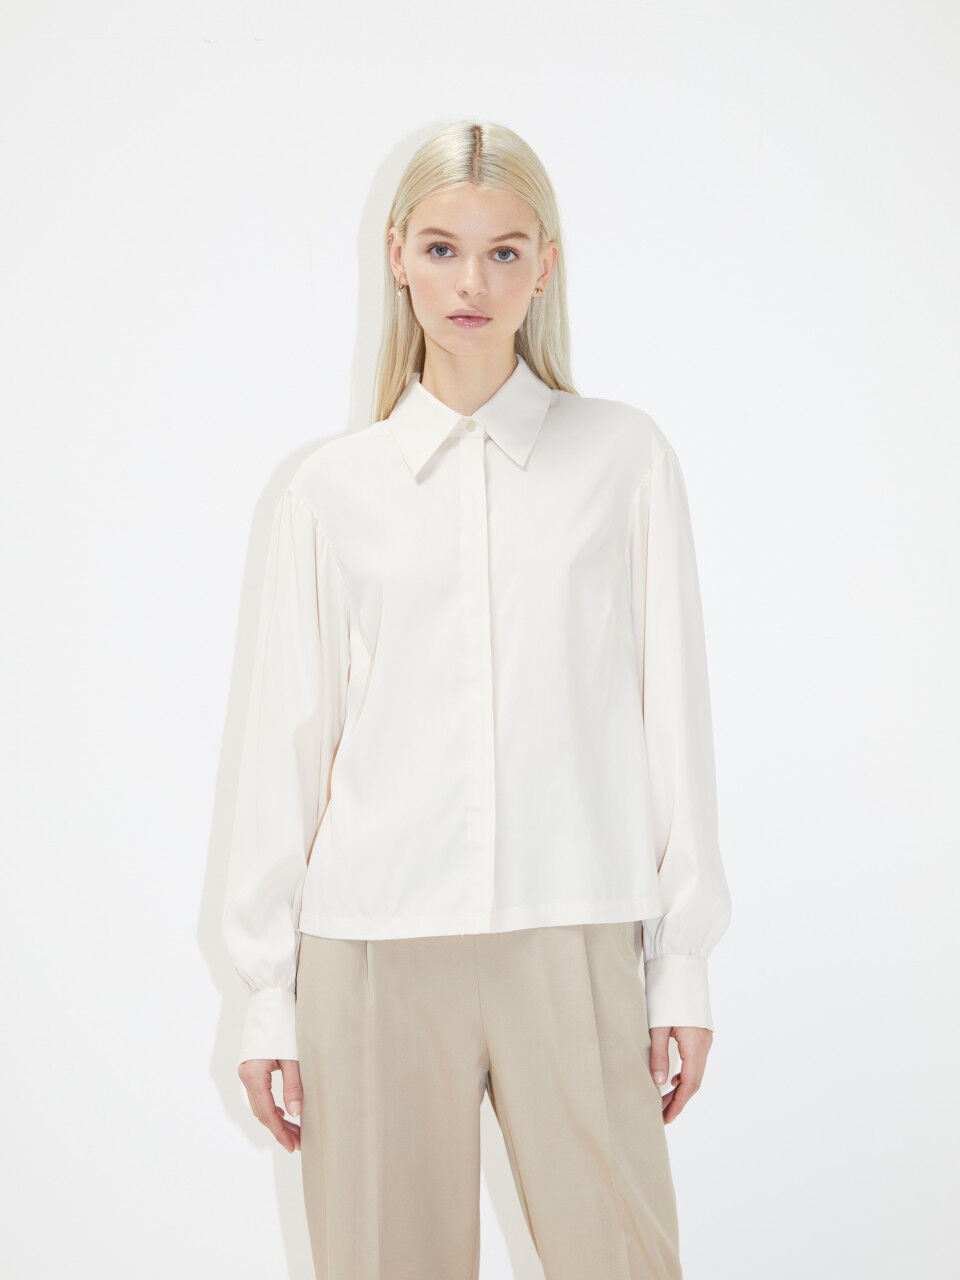 Women's Shirts and Blouses New Collection 2021 | Sisley